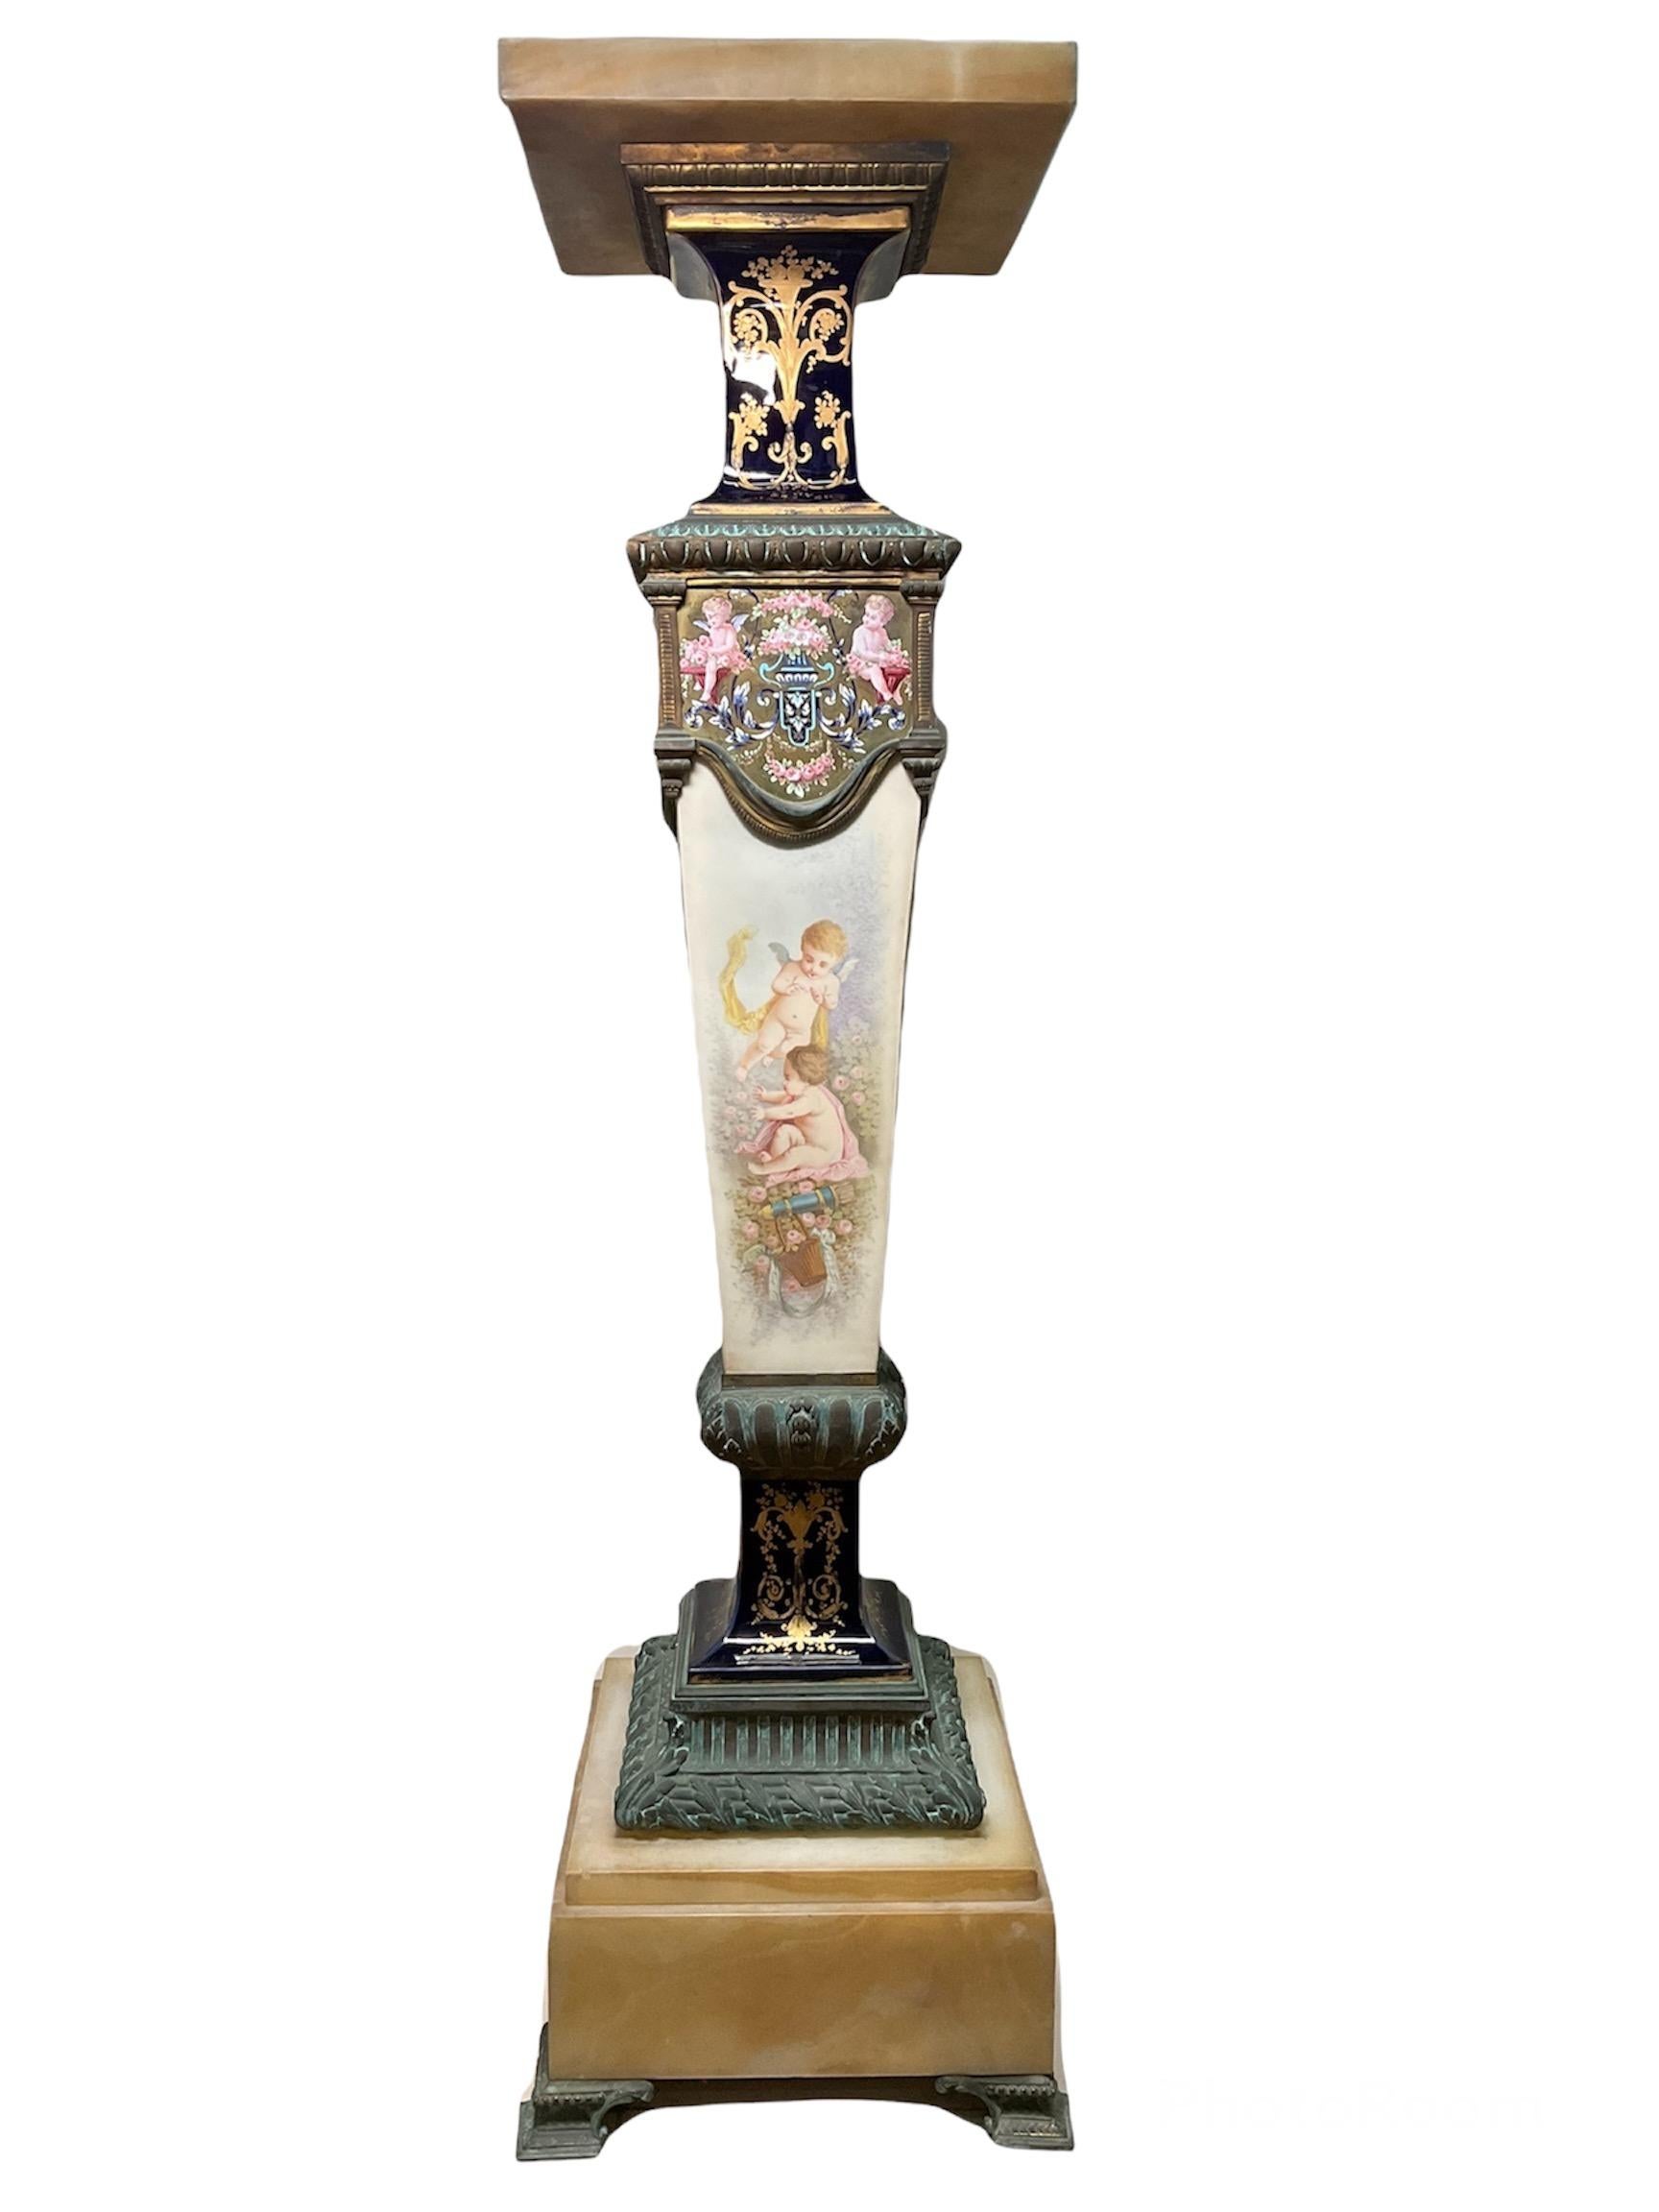 This is a Sevres Style onyx, bronze and hand painted porcelain pedestal. The pedestal consists of eight pieces. The first piece is the onyx square top followed by the second piece that is a bronze square base. Then come a long square gilt cobalt